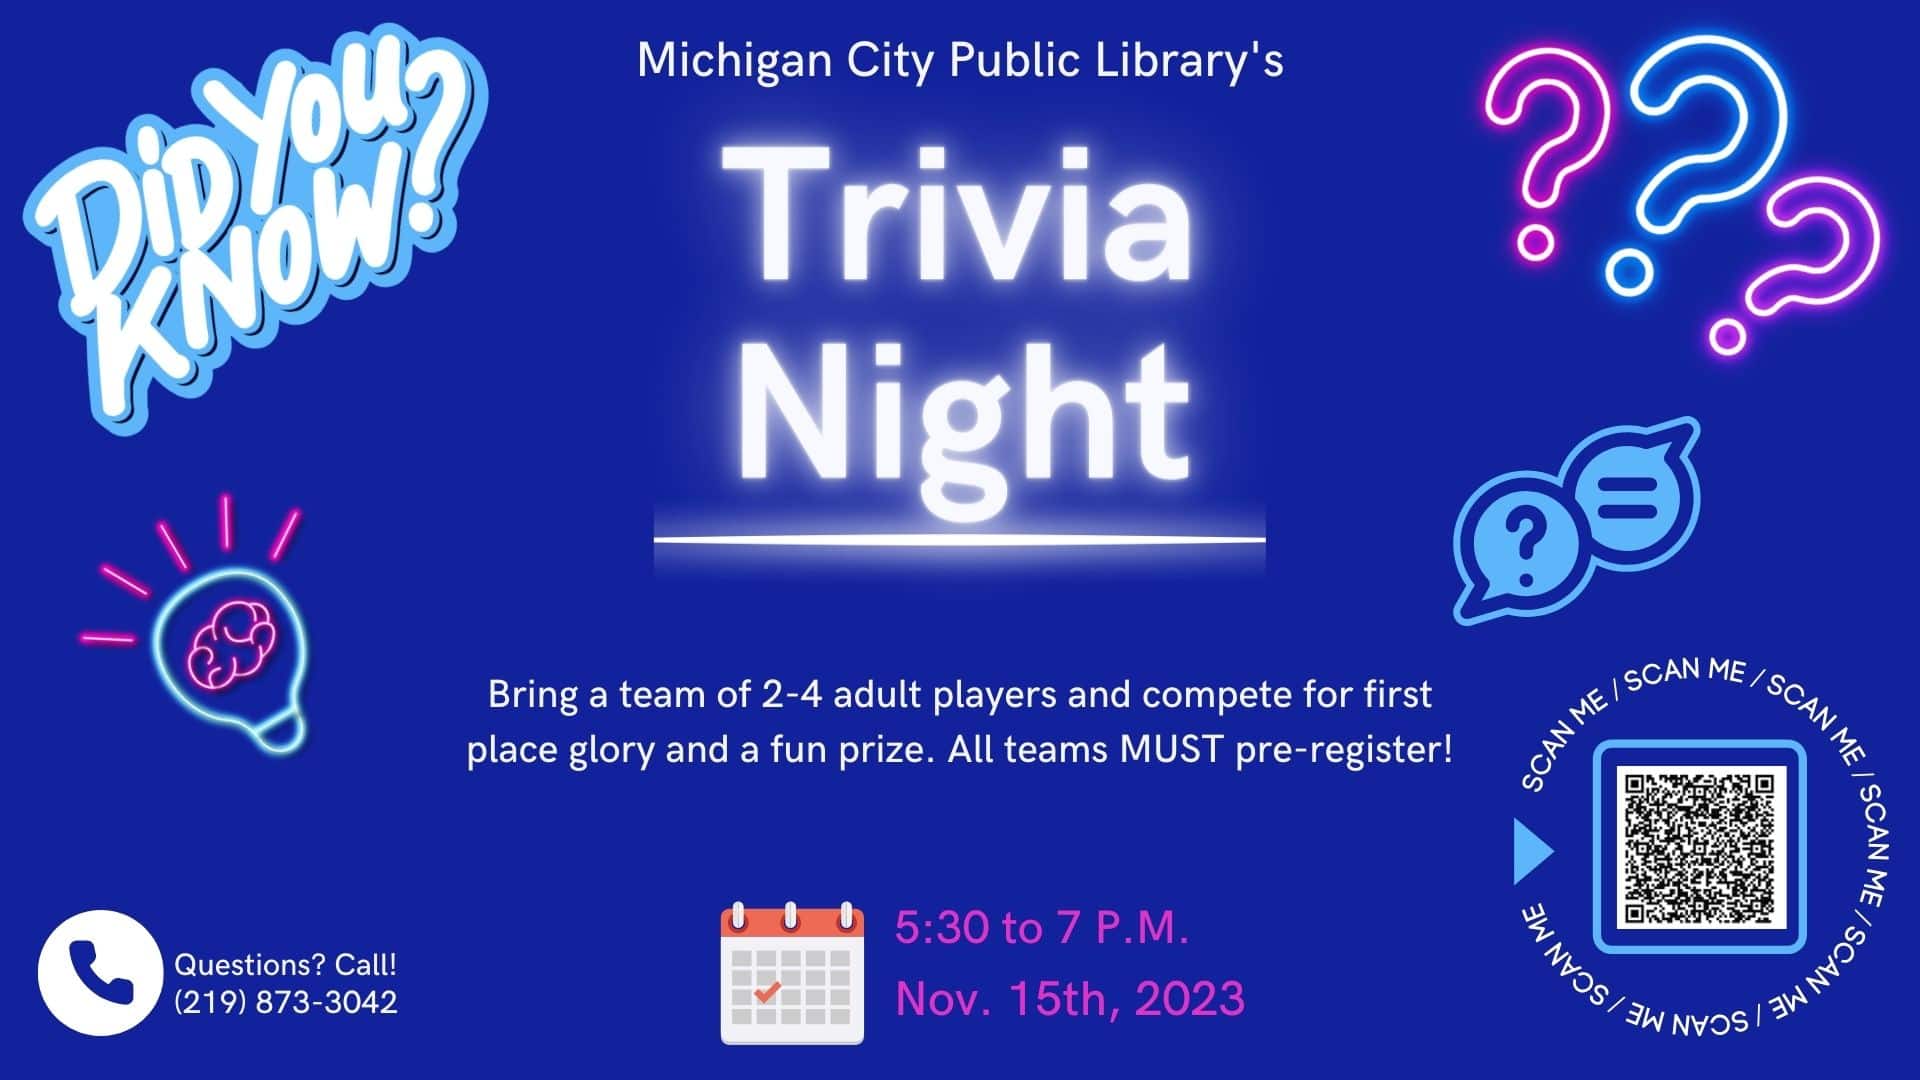 Trivia Night for Adults, Wednesday, November 15, 5:30-7, pre-registration required